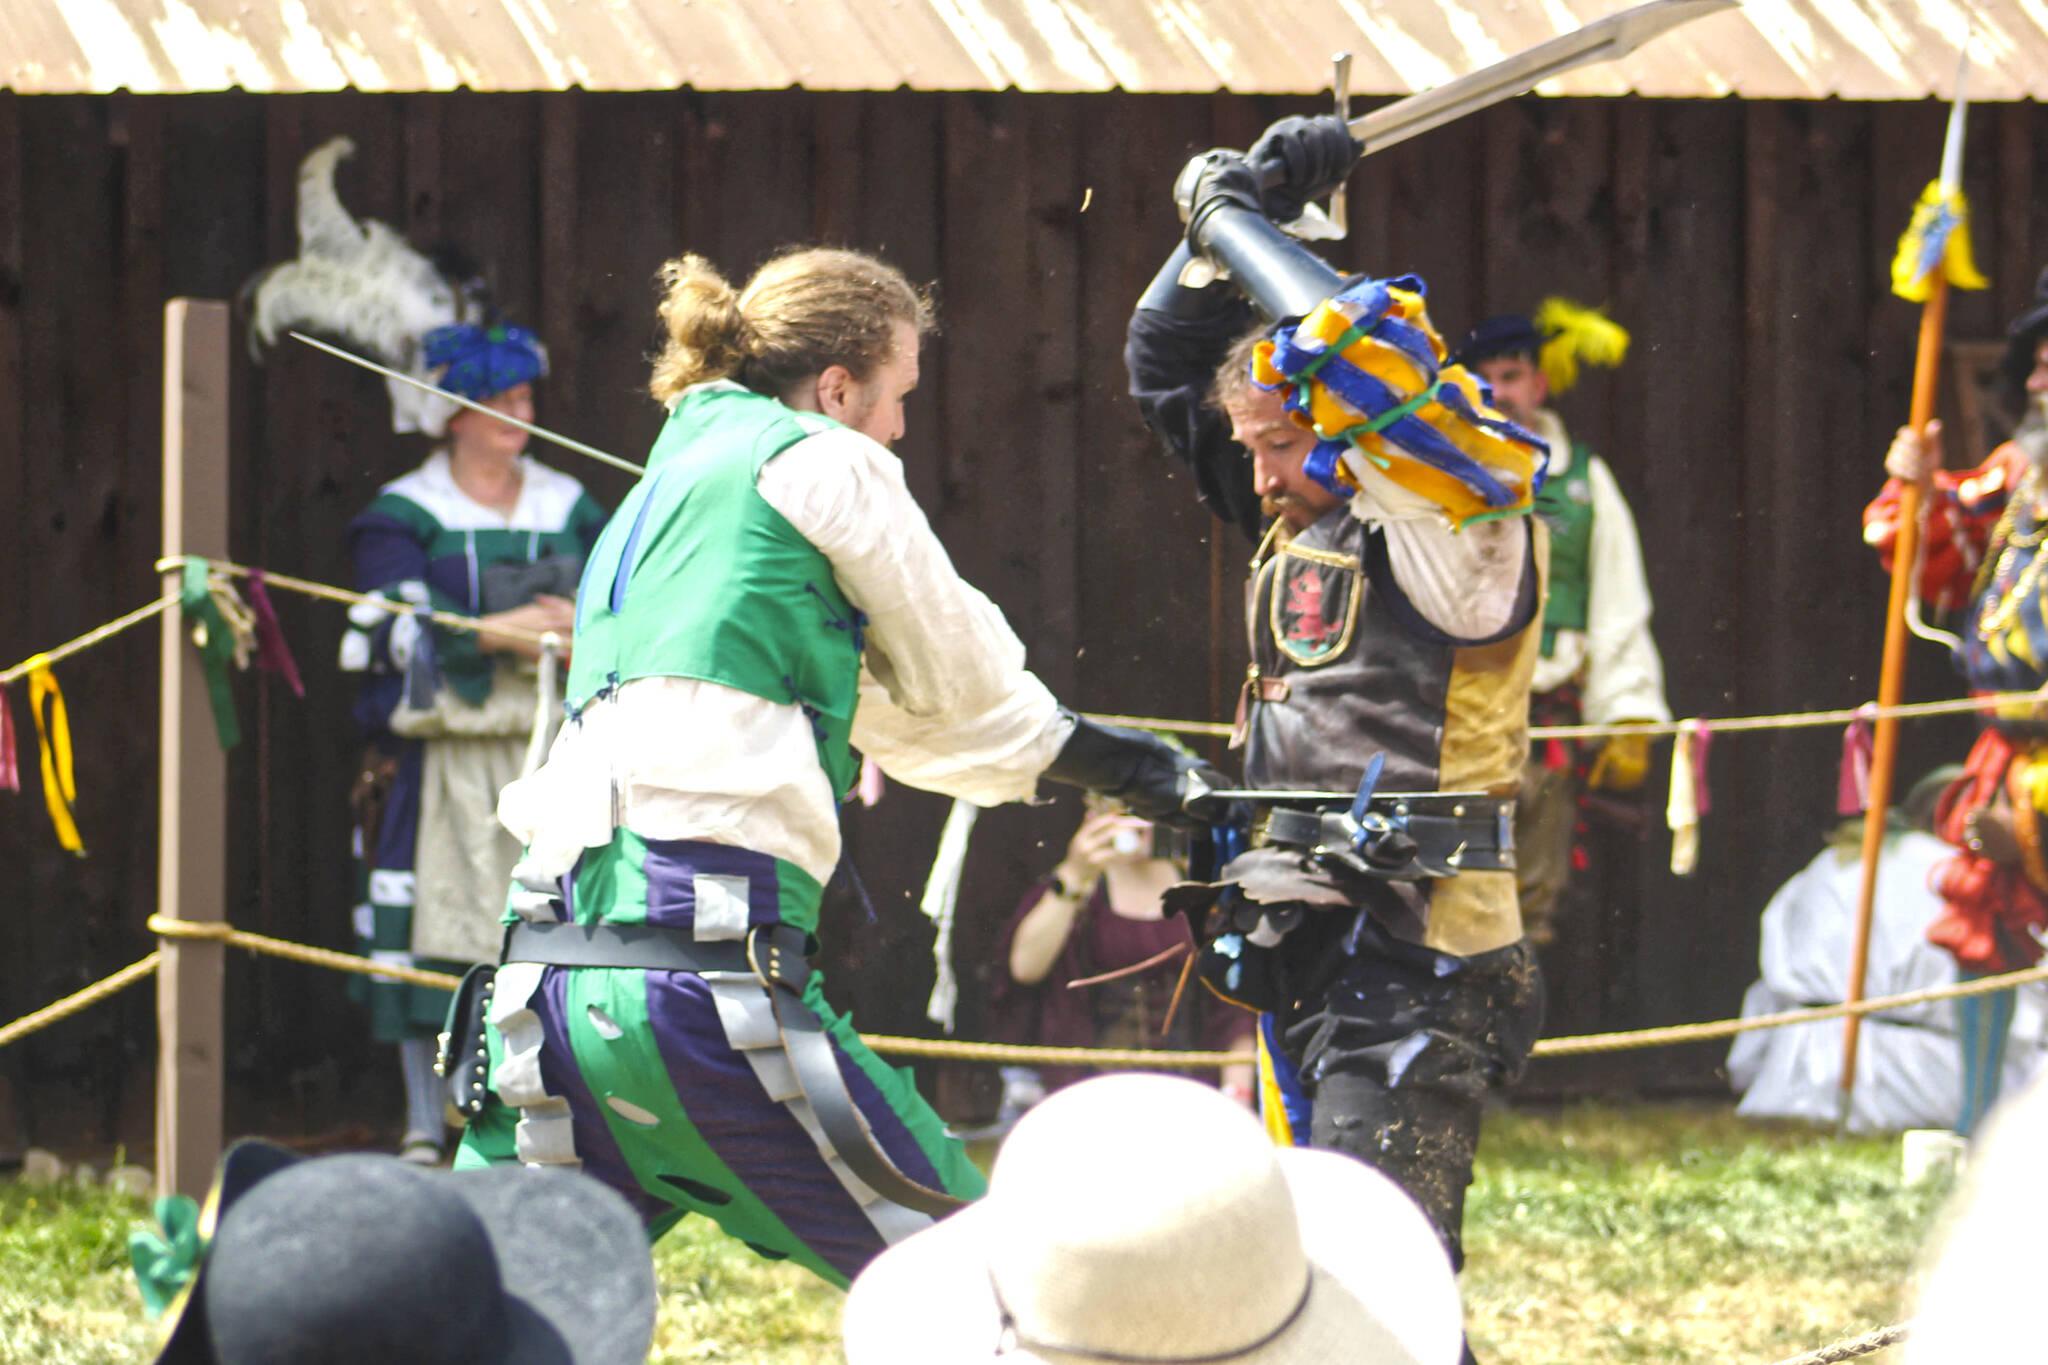 The Washington Midsummer Renaissance Faire is moving to Snohomish after a rough 2022 season. (Photo by Ray Miller-Still)